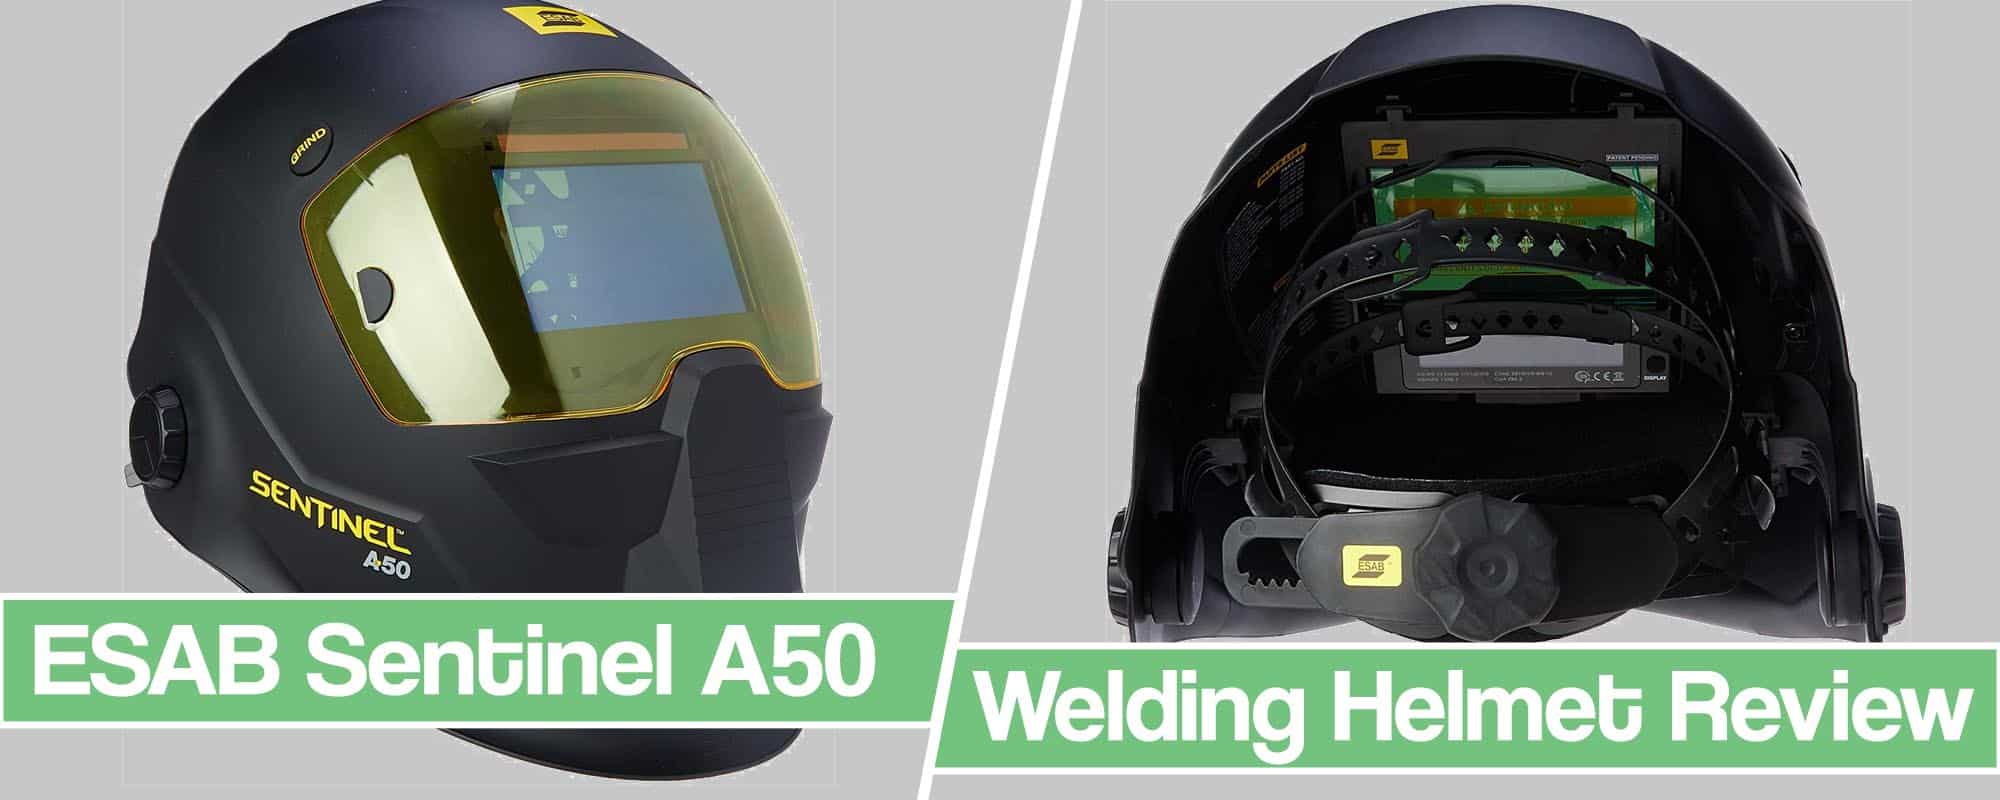 ESAB Sentinel A50 Welding Helmet Review Features and Benefits 2022